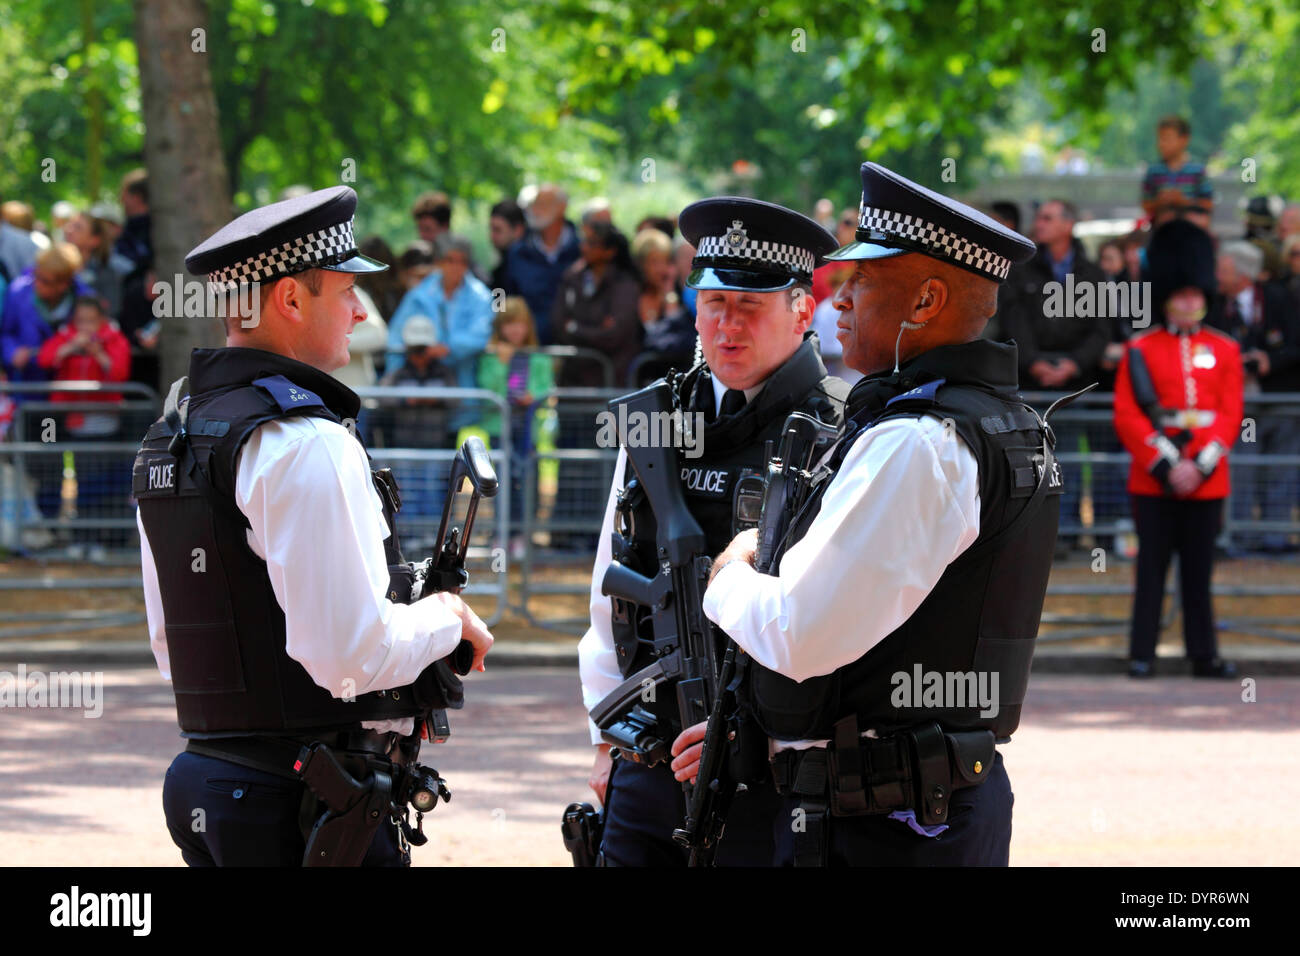 Metropolitan Police officers chat in Pall Mall before the Trooping the Colour ceremonies, London , England 2011 Stock Photo